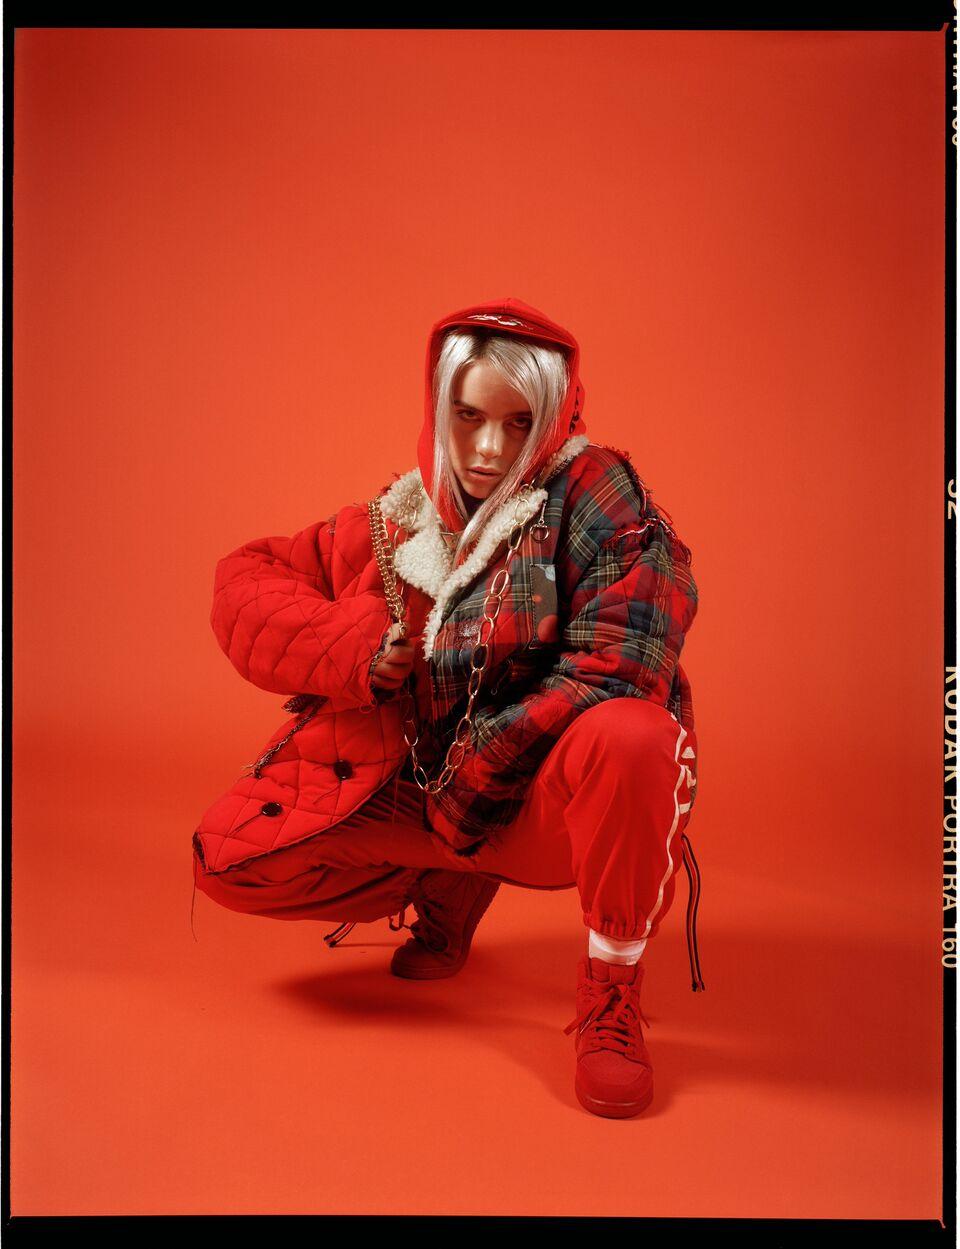 Billie Eilish performs Guitar Songs live from Singapore's Cloud Forest